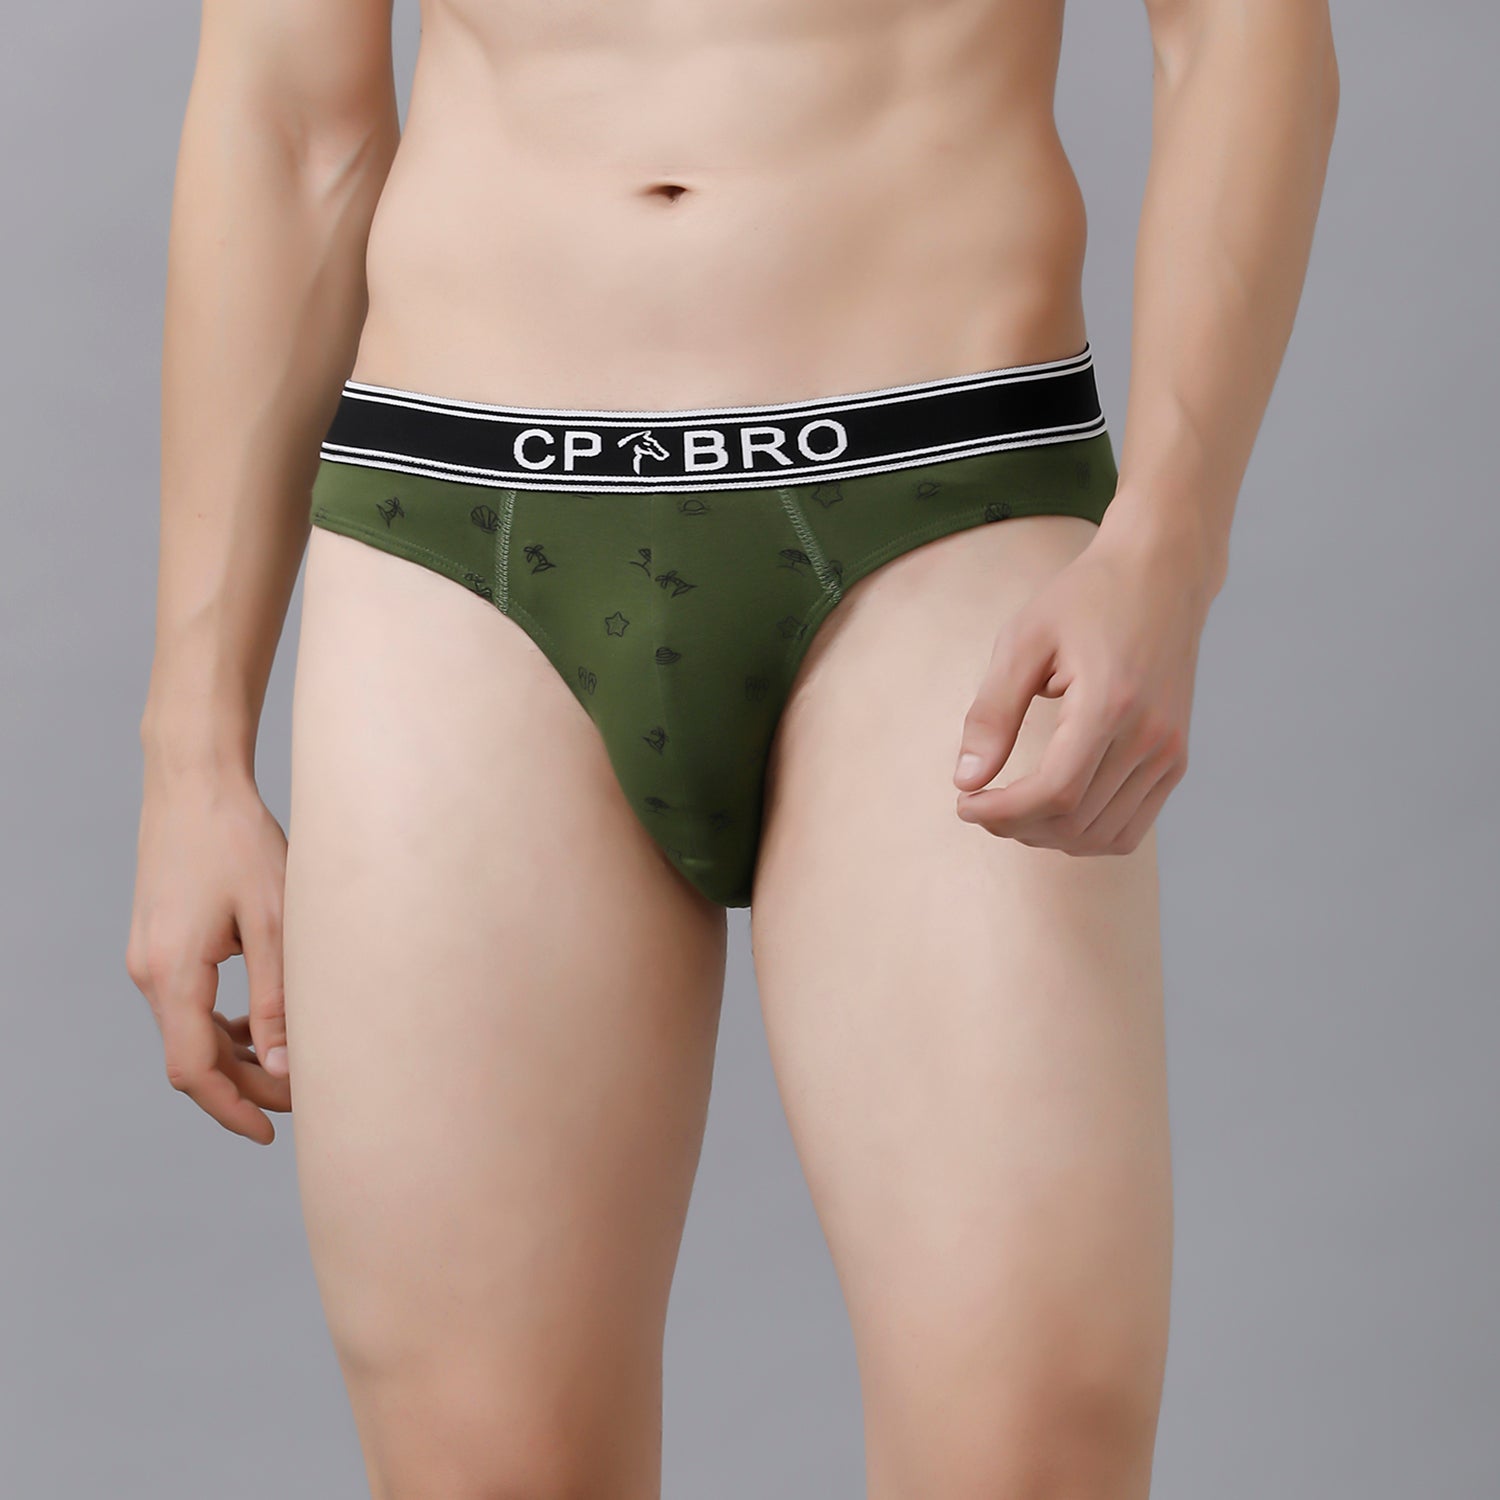 CP BRO Men's Printed Briefs with Exposed Waistband Value Pack - Multic